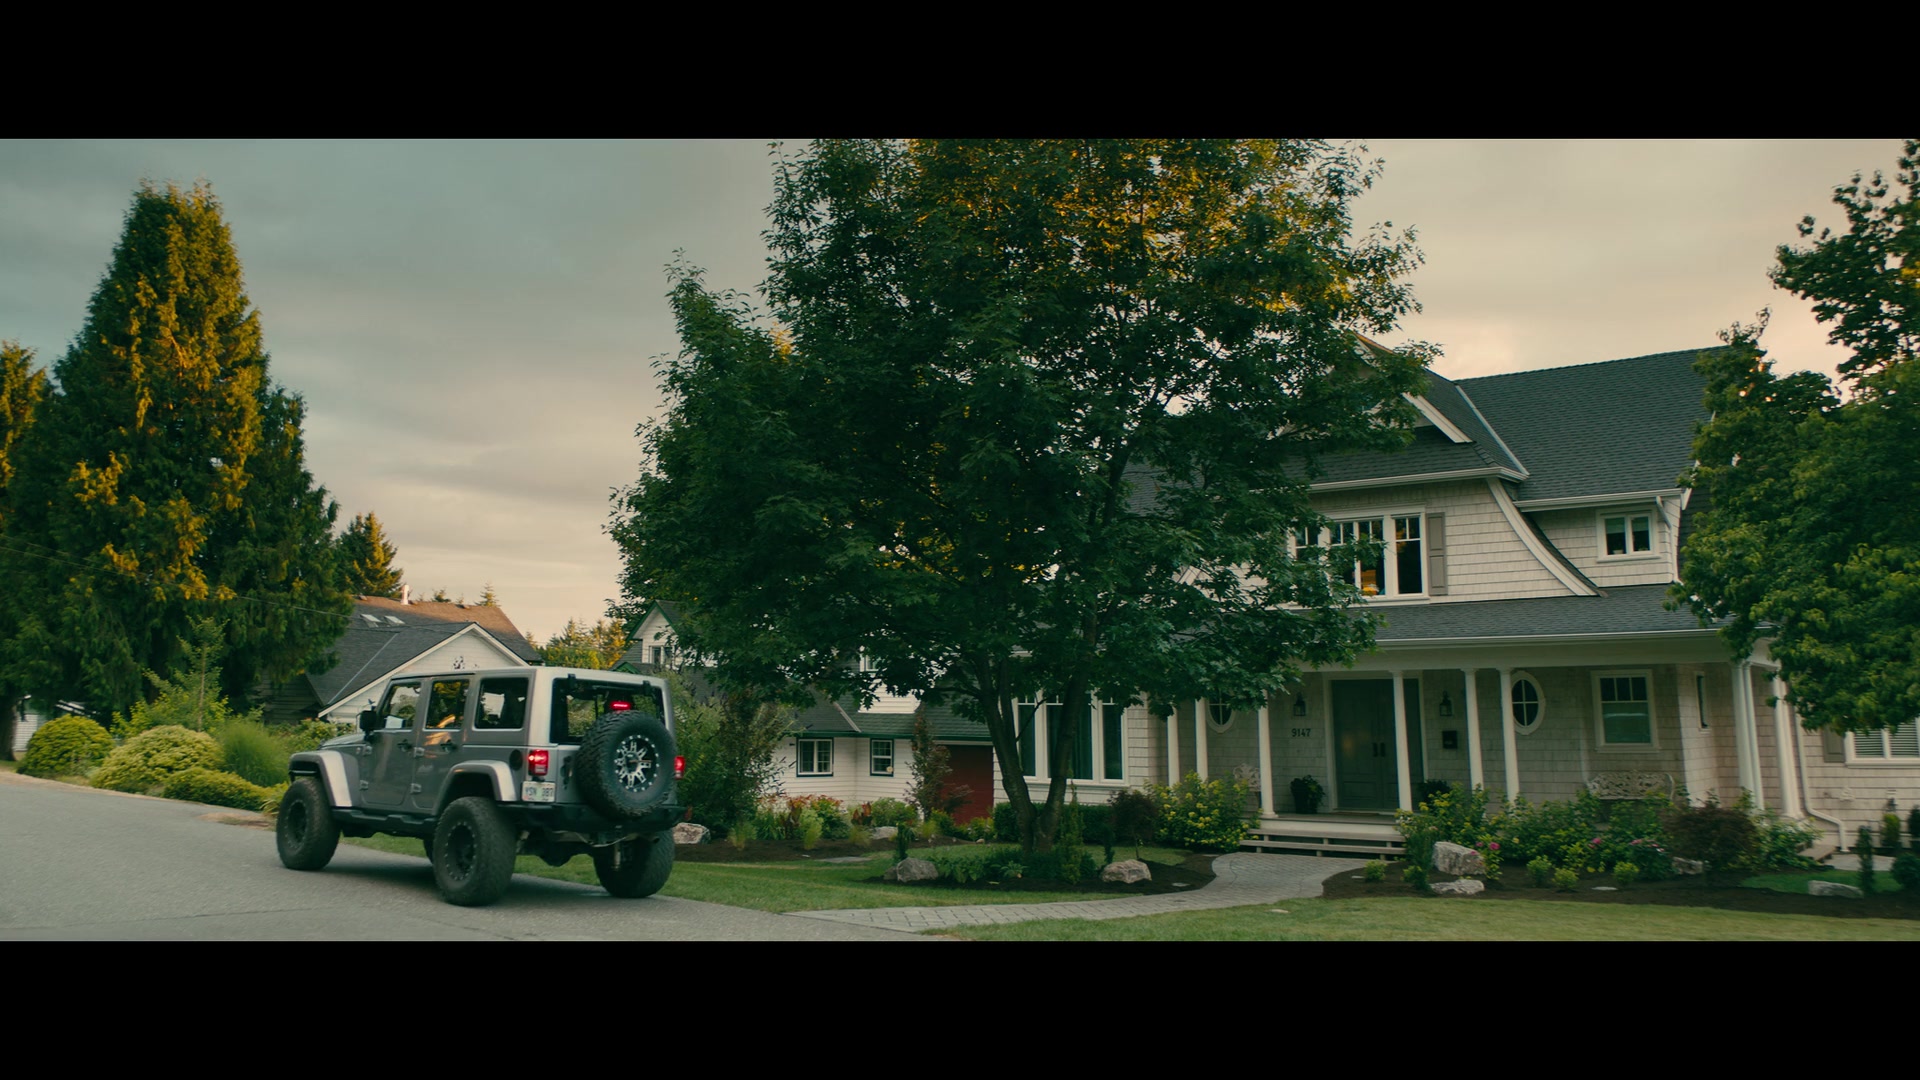 Jeep Wrangler Car Used by Noah Centineo in To All the Boys I’ve Loved Before (2018 ...